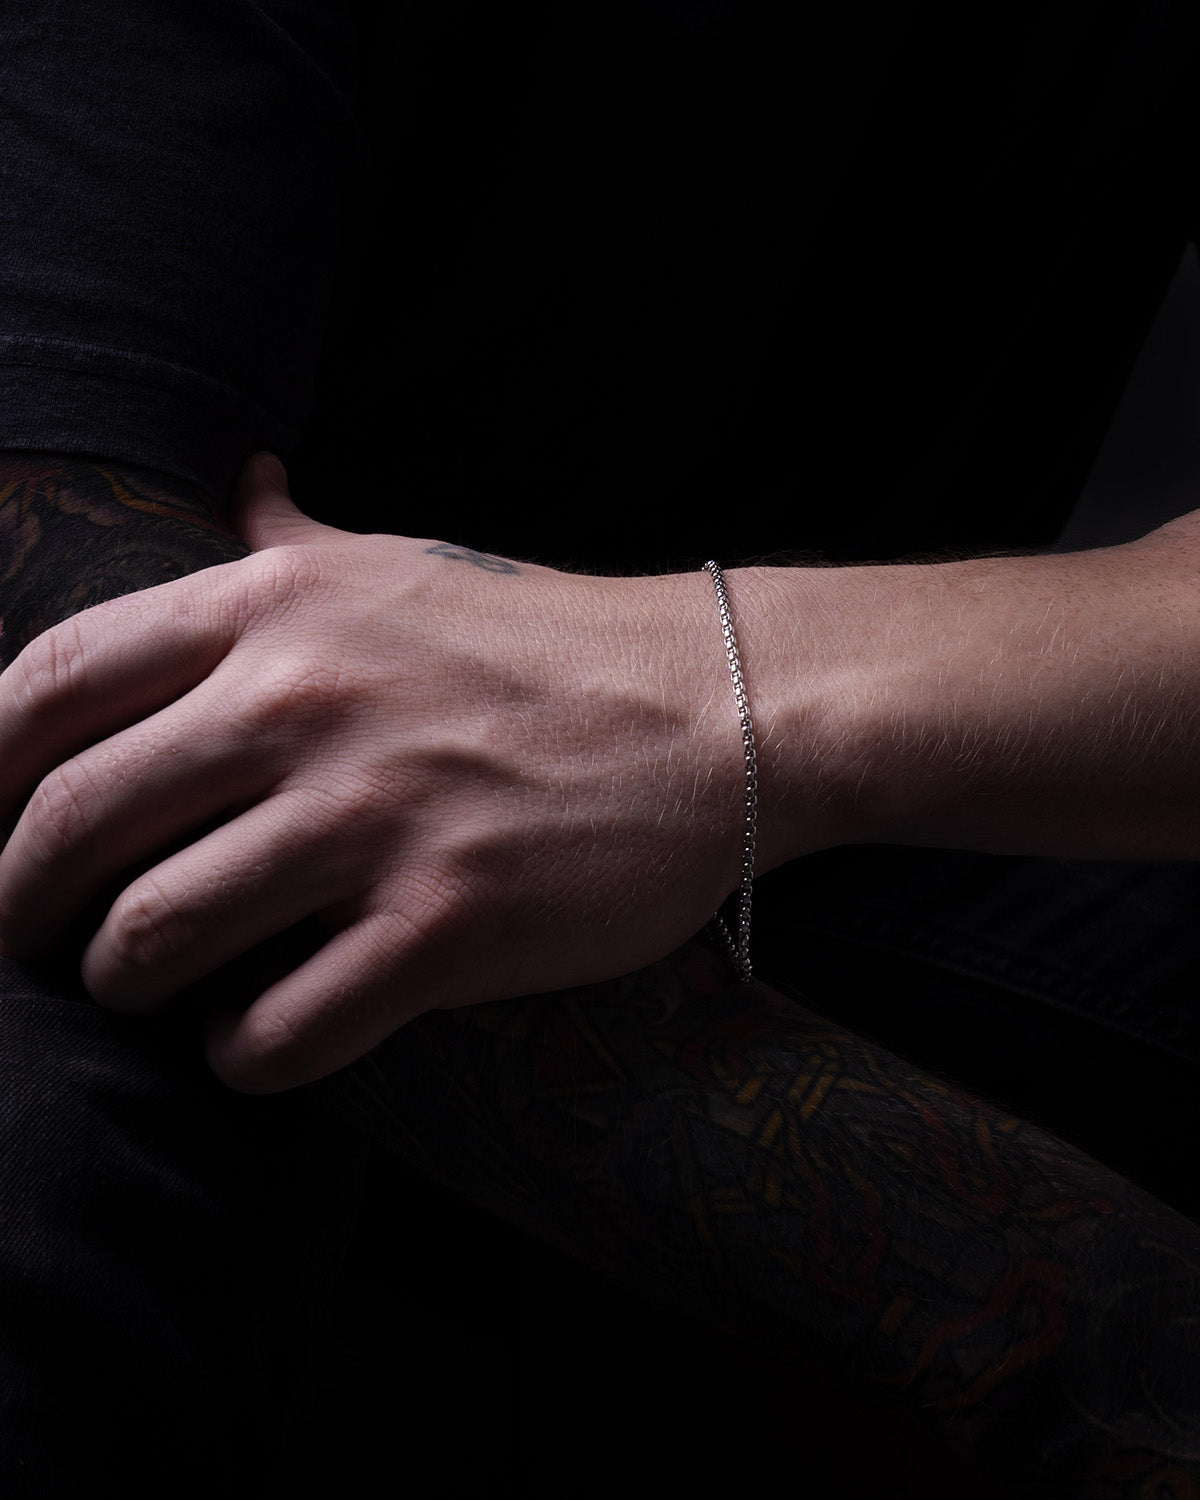 Five Jwlry's men's bracelet, designed in Montreal, featuring a 2.5mm rounded box chain in silver color, accentuated with the brand's signature logo tag.